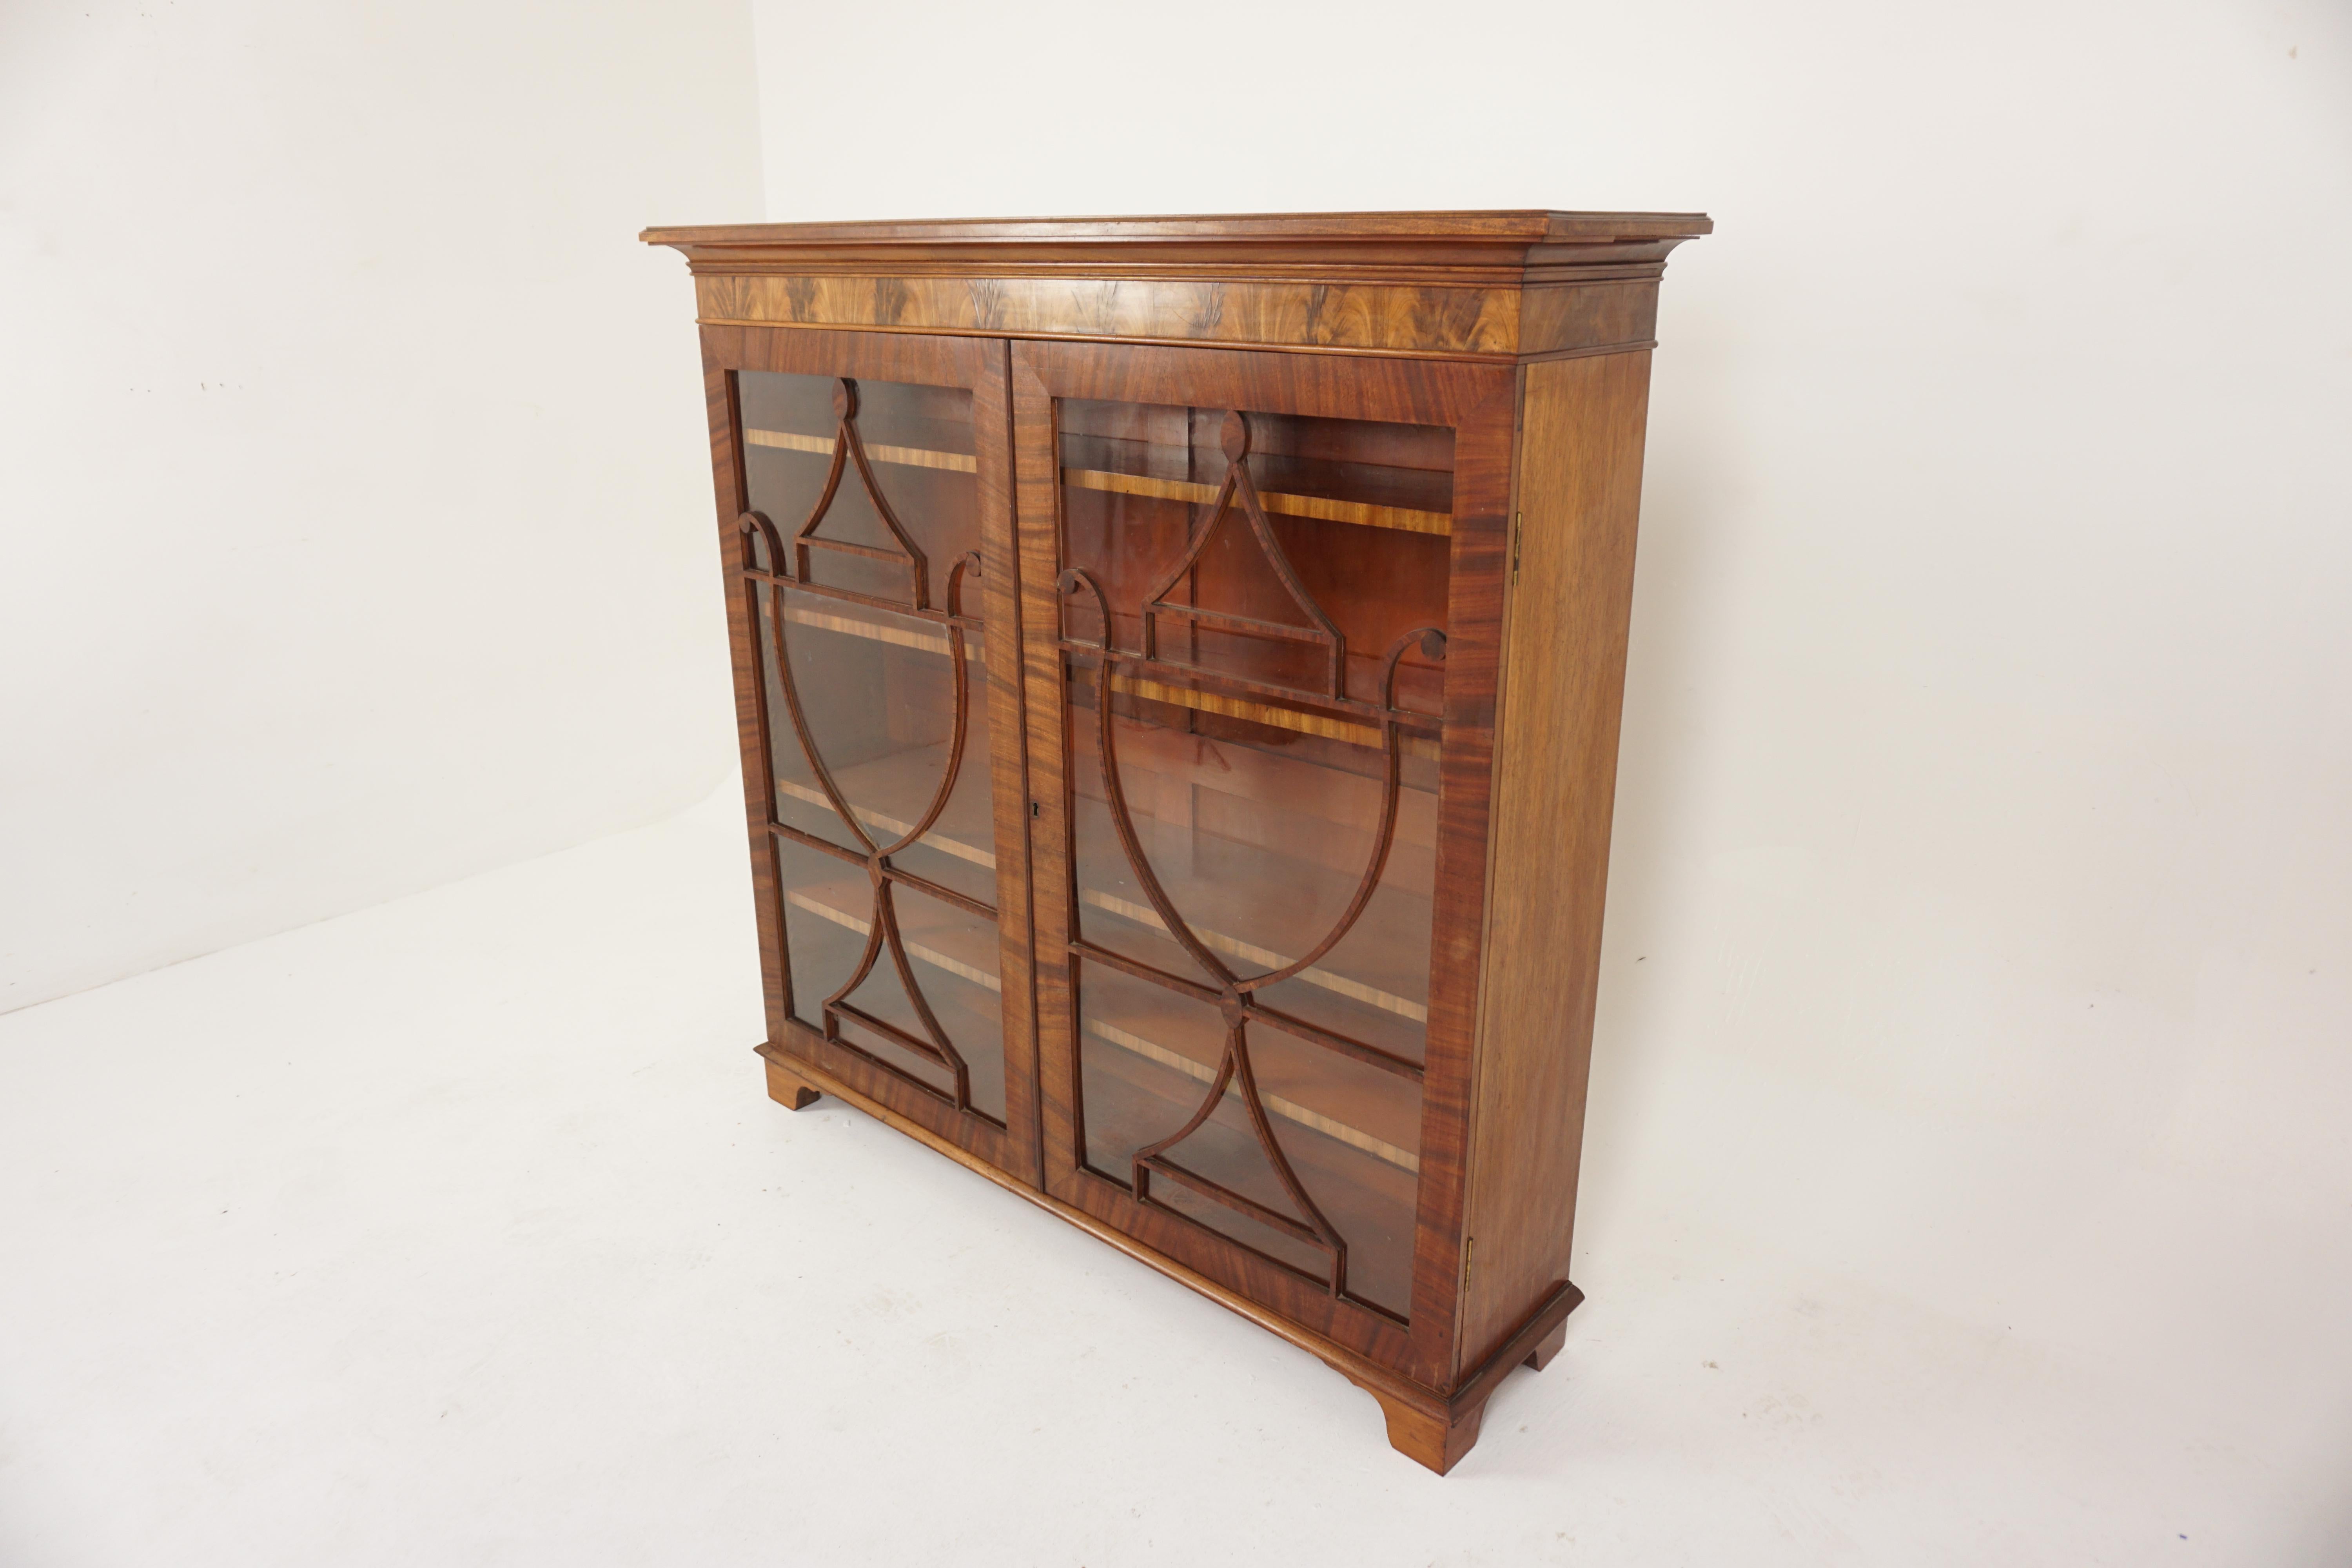 Antique Walnut 2 door bookcase, display cabinet China cabinet, Scotland 1910, H708.

Scotland 1910
Solid walnut + veneers
Original Finish.
Rectangular moulded top.
Pair of original glass doors with moulding on the front.
Four wooden